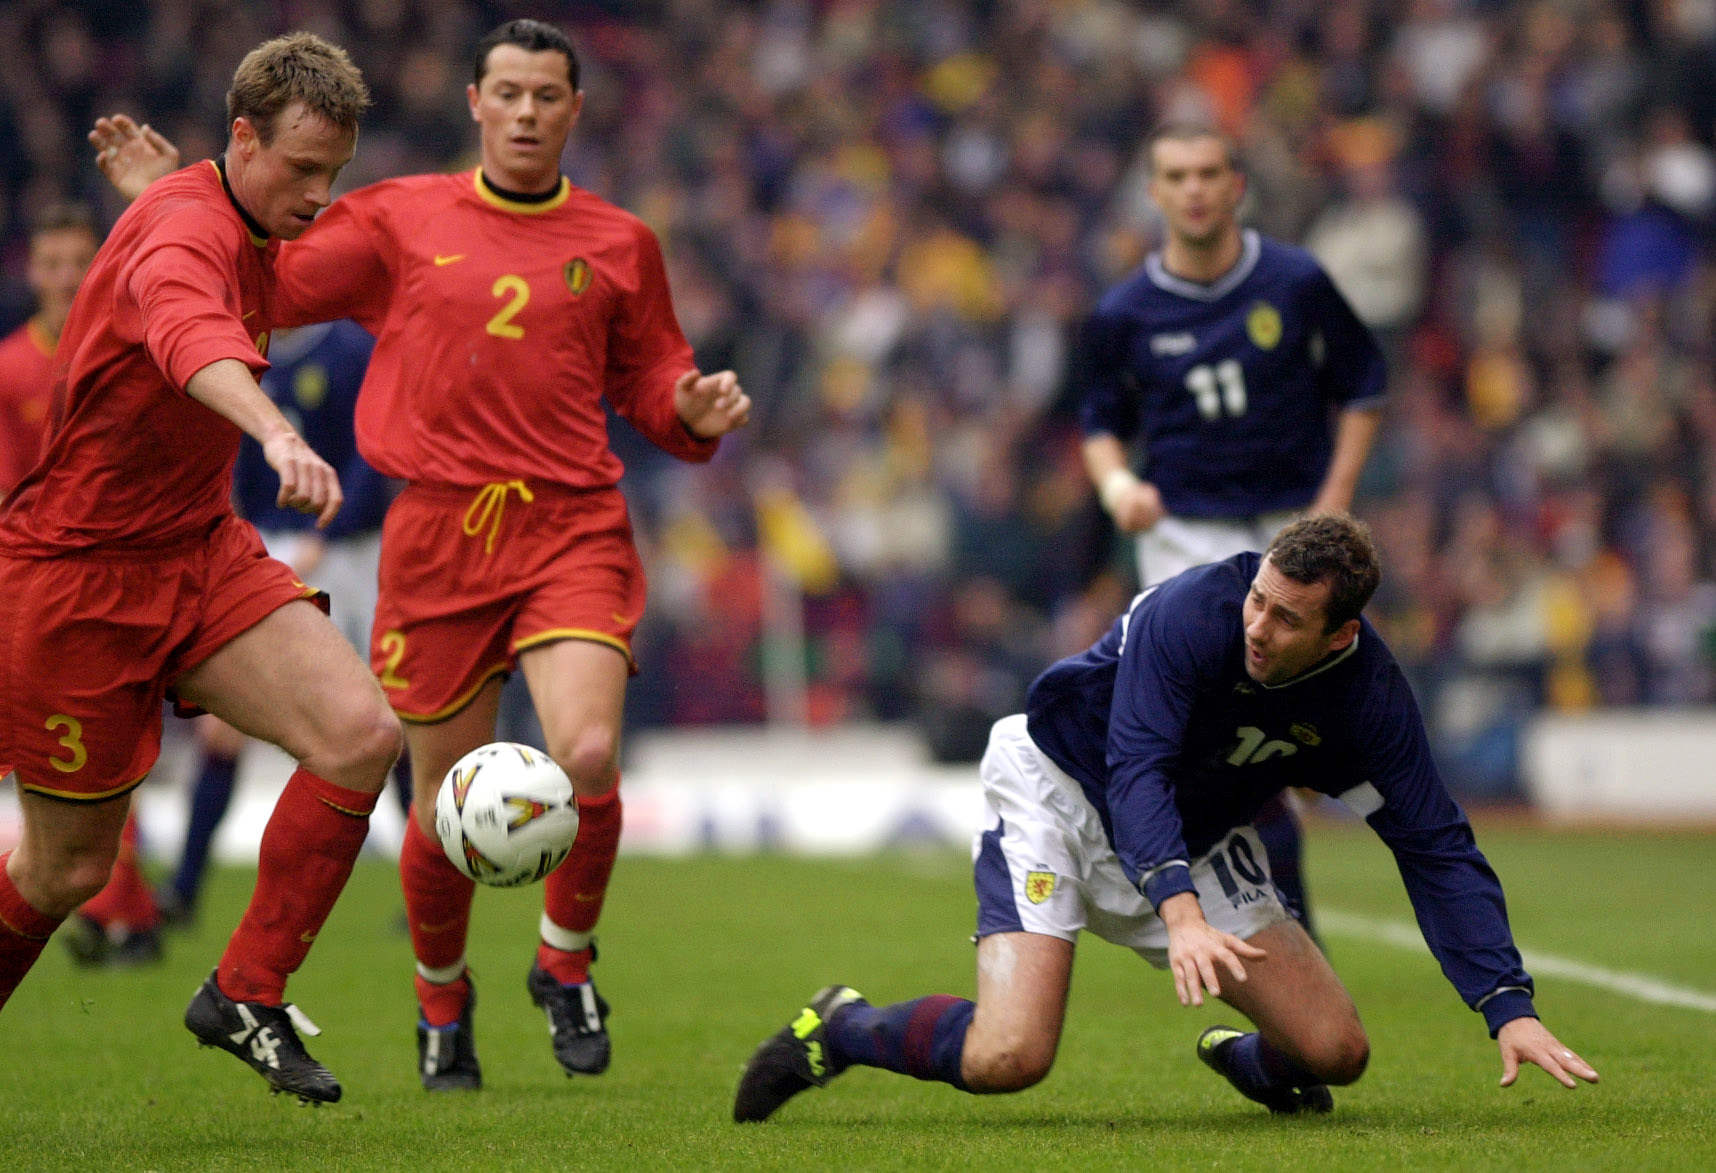 Belgium's Joos Valgaeren (left) takes the ball from Scotland's Don Hutchison during the World Cup Group Six qualifier game at Hampden Park, Glasgow on March 24, 2001. Photo: Ben Curtis